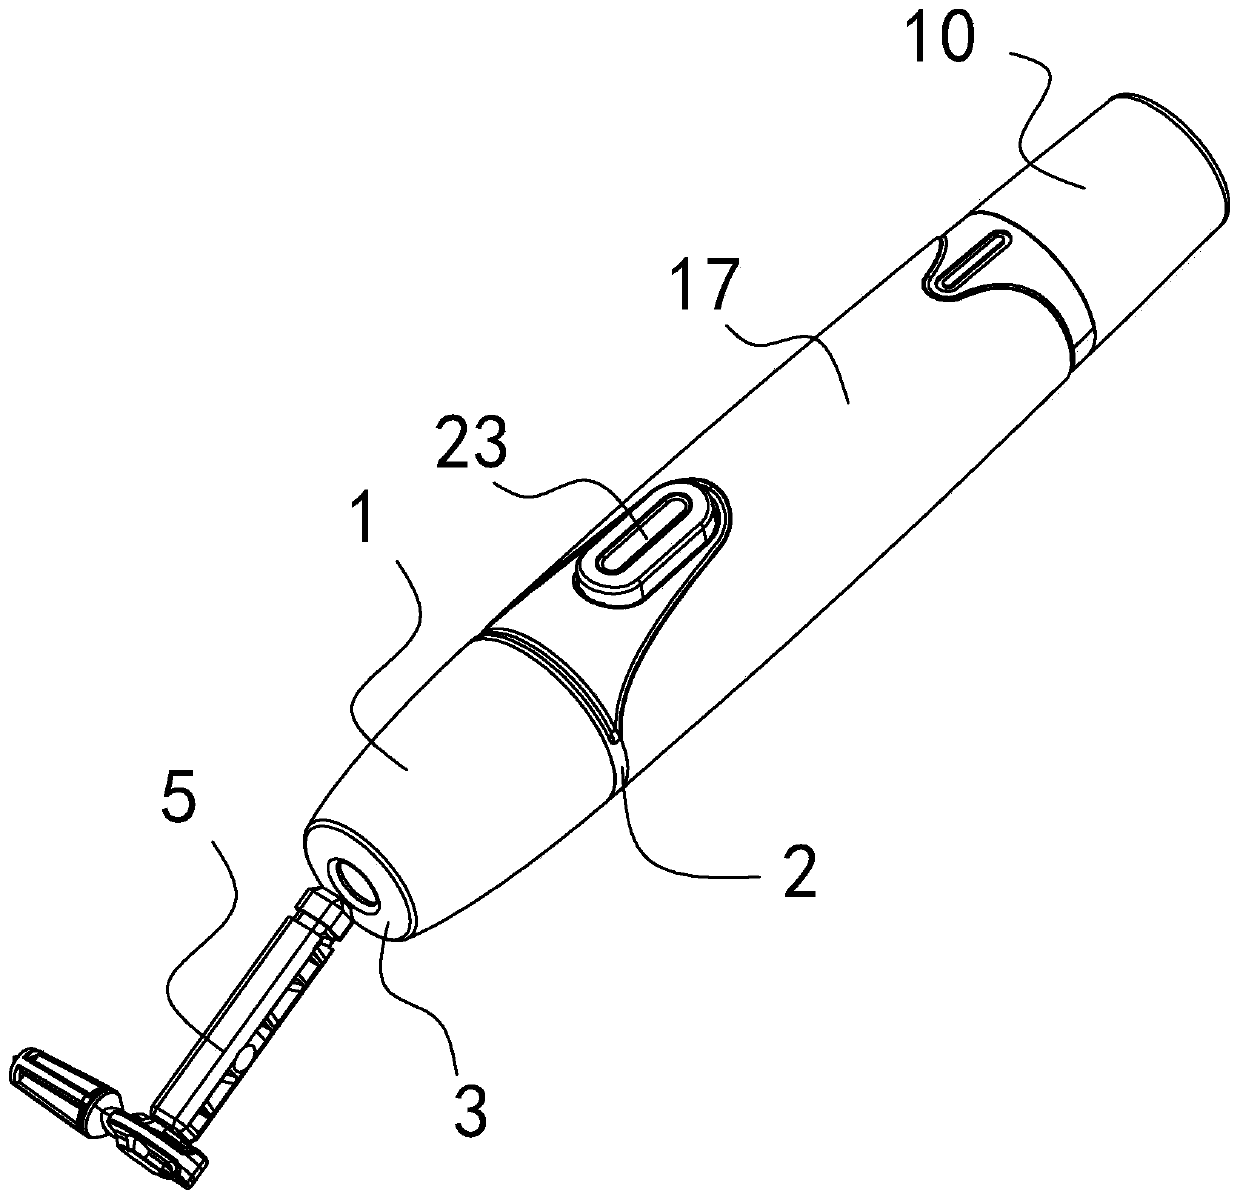 Blood sampling pen capable of preventing mistakenly operated needle unloading after loading